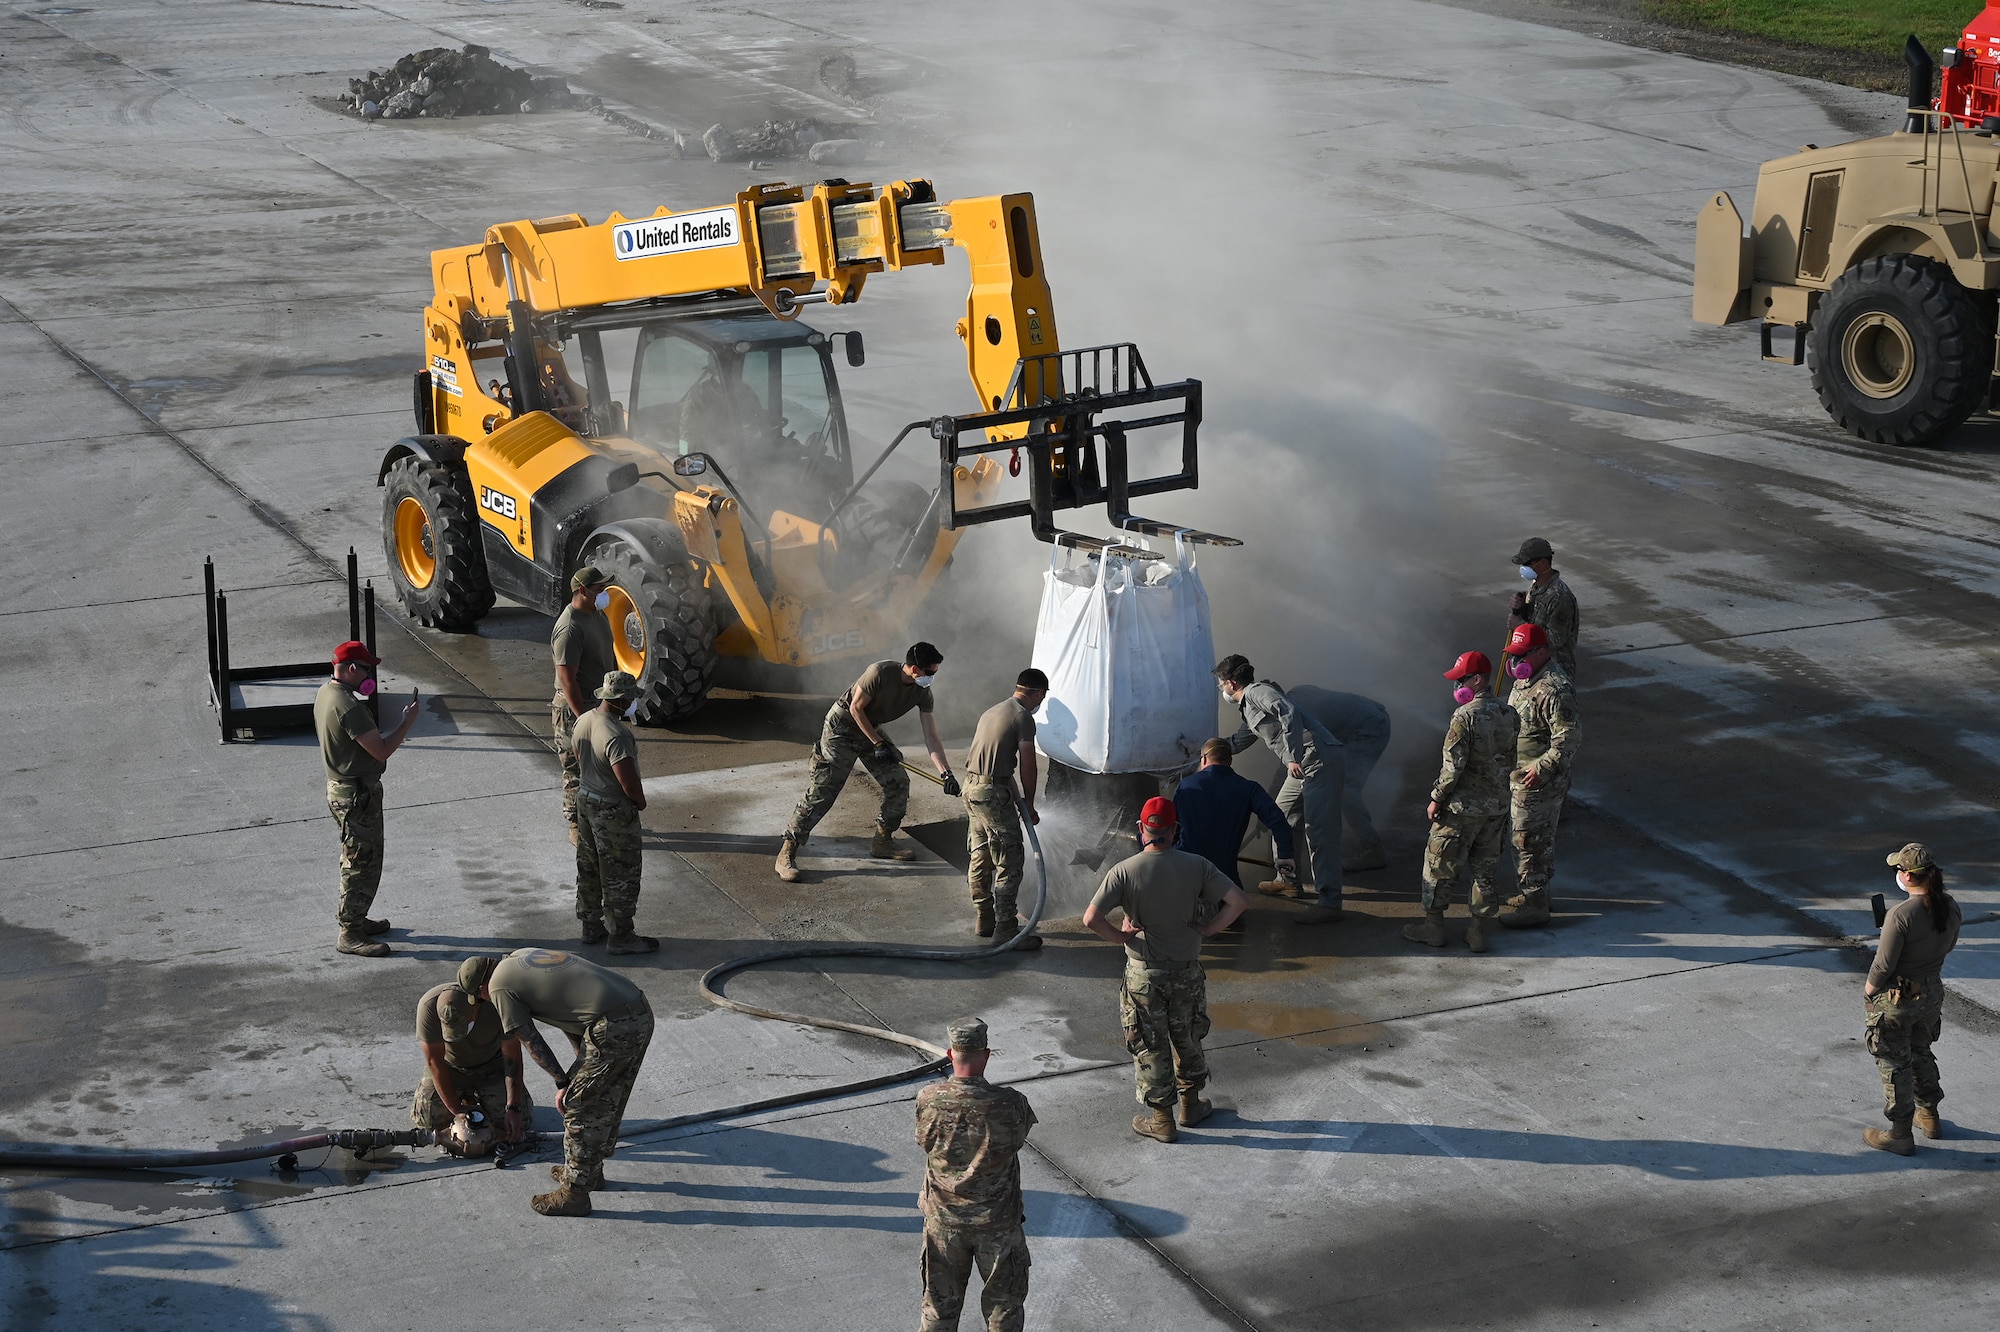 Many military members can be seen in this view from above as they rake fast-drying concrete material into place in a hole on a concrete training runway as a teleextender holds a bag in place above the hole at the North Dakota Air National Guard Regional Training Site, Fargo, N.D., Sept, 30, 2021.